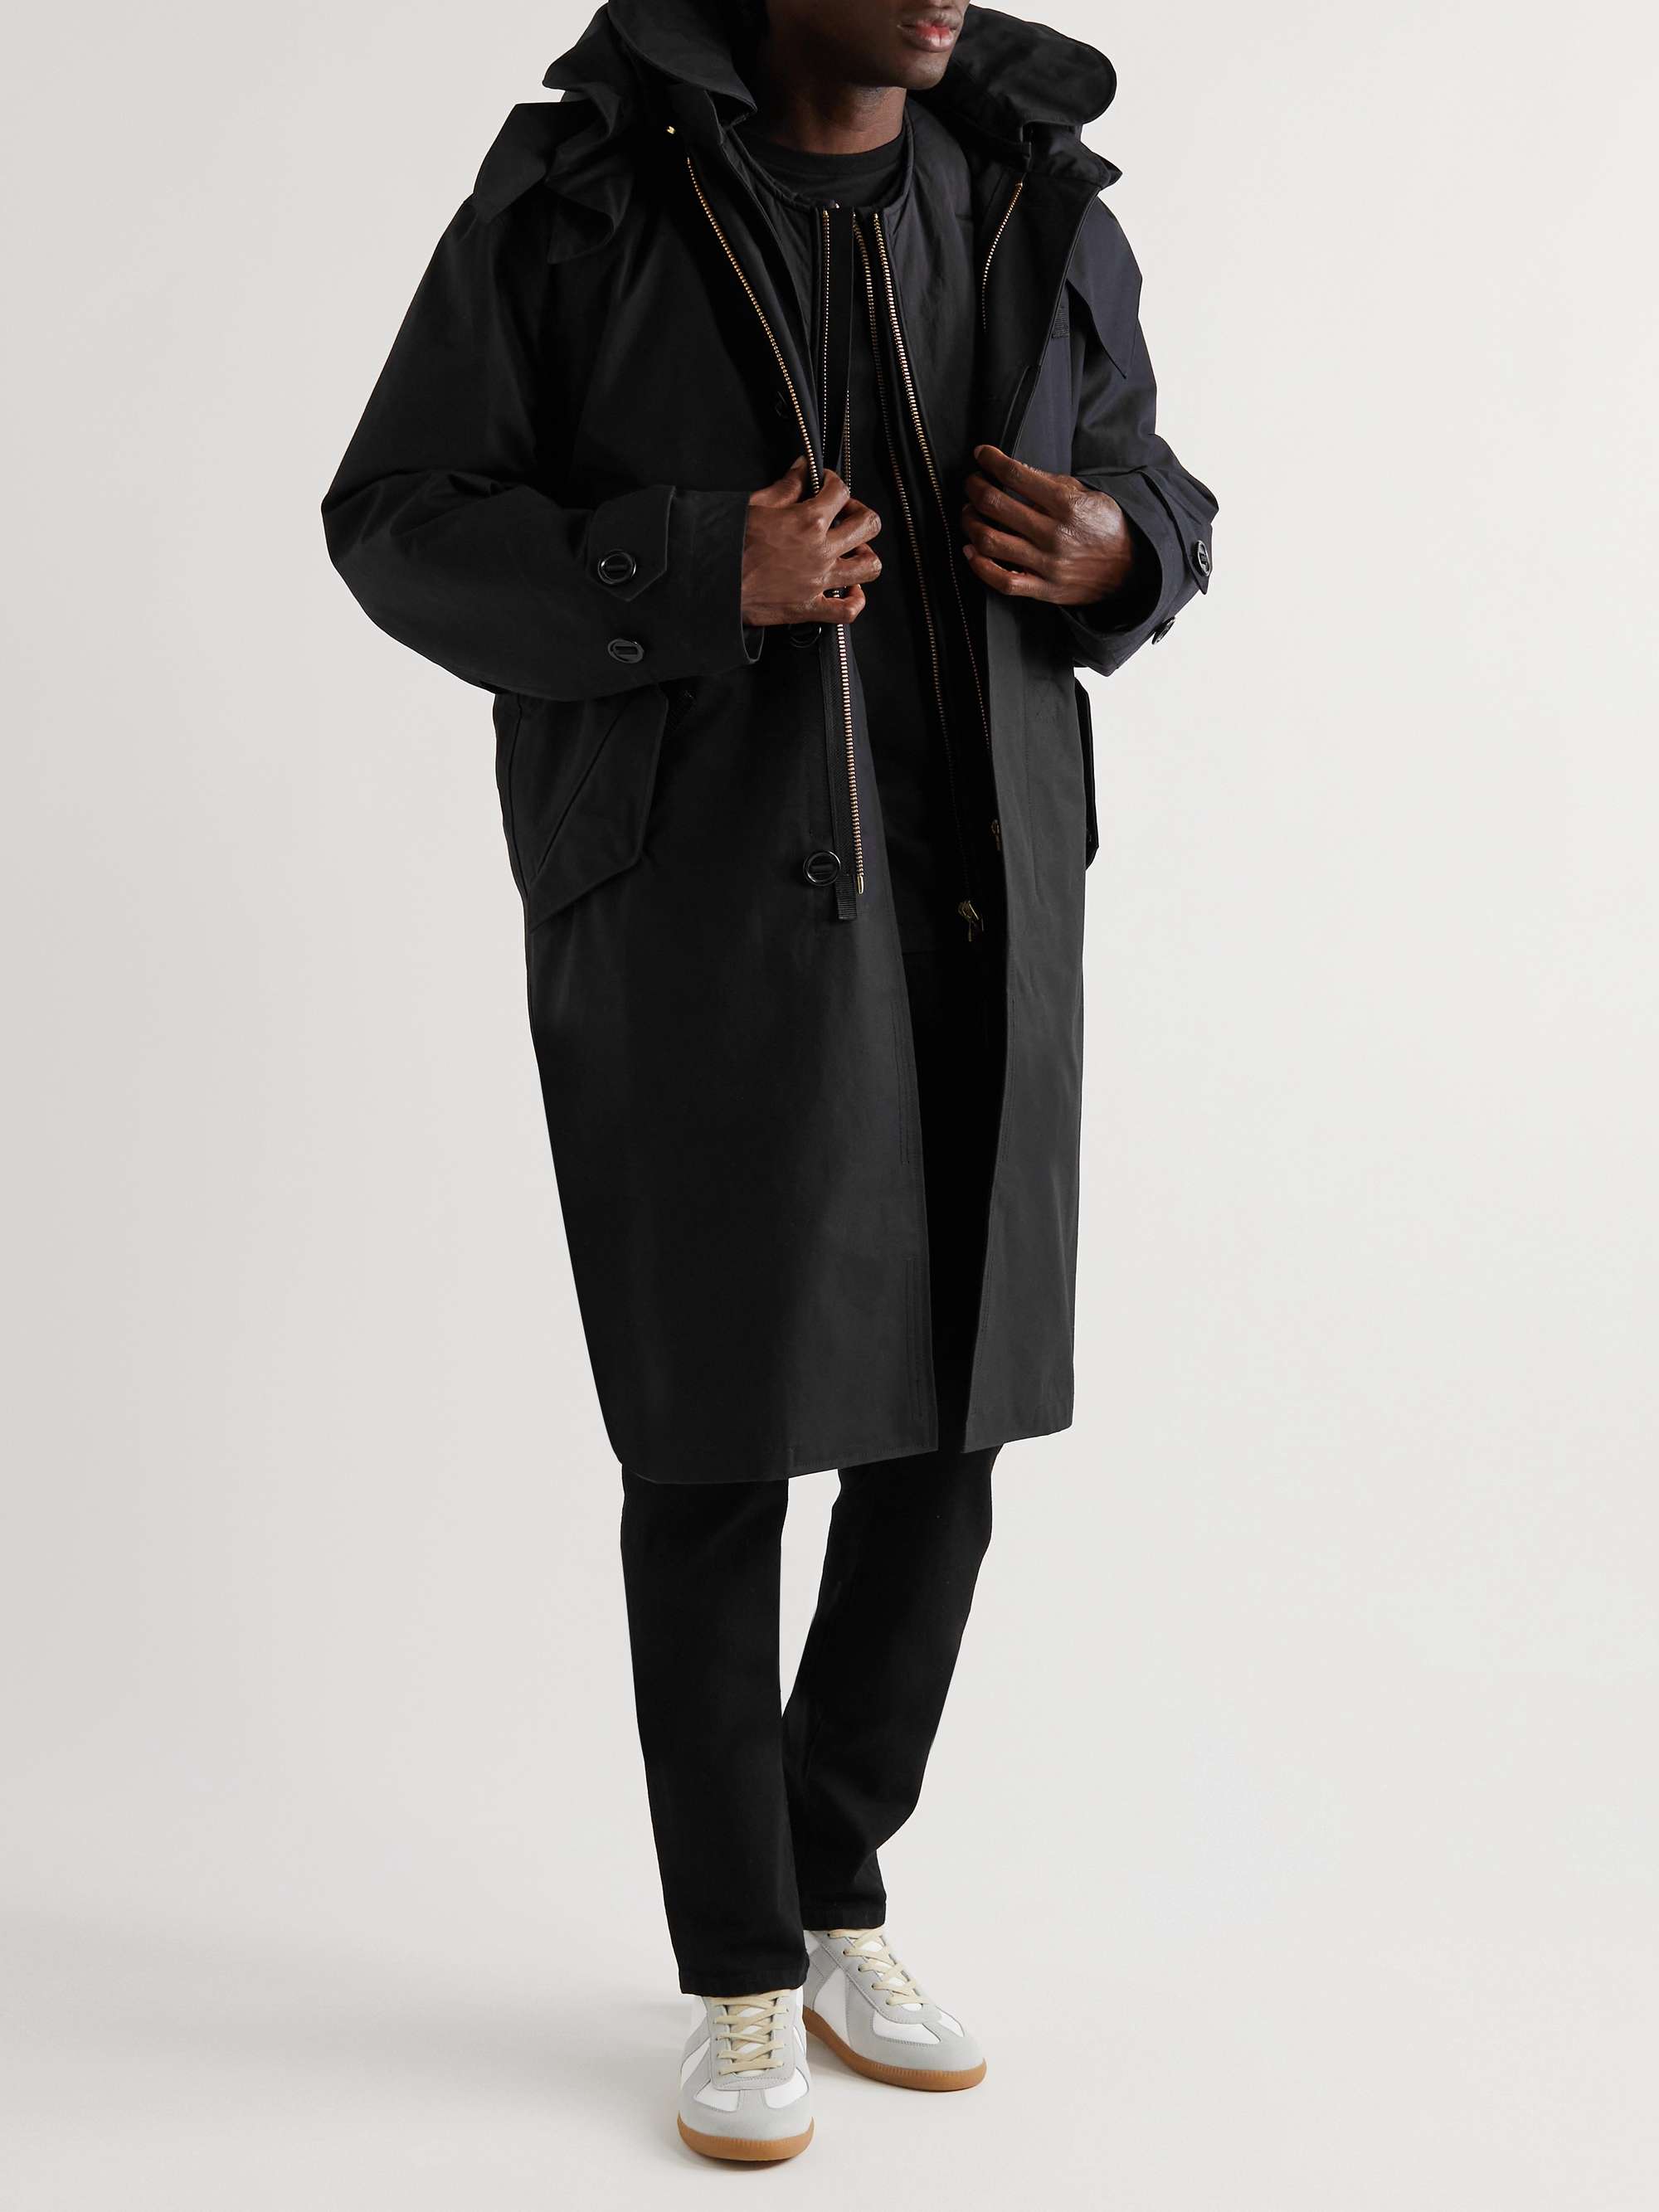 APPLIED ART FORMS AM2-1 Convertible Padded Cotton-Ventile Hooded Parka with Detachable Liner